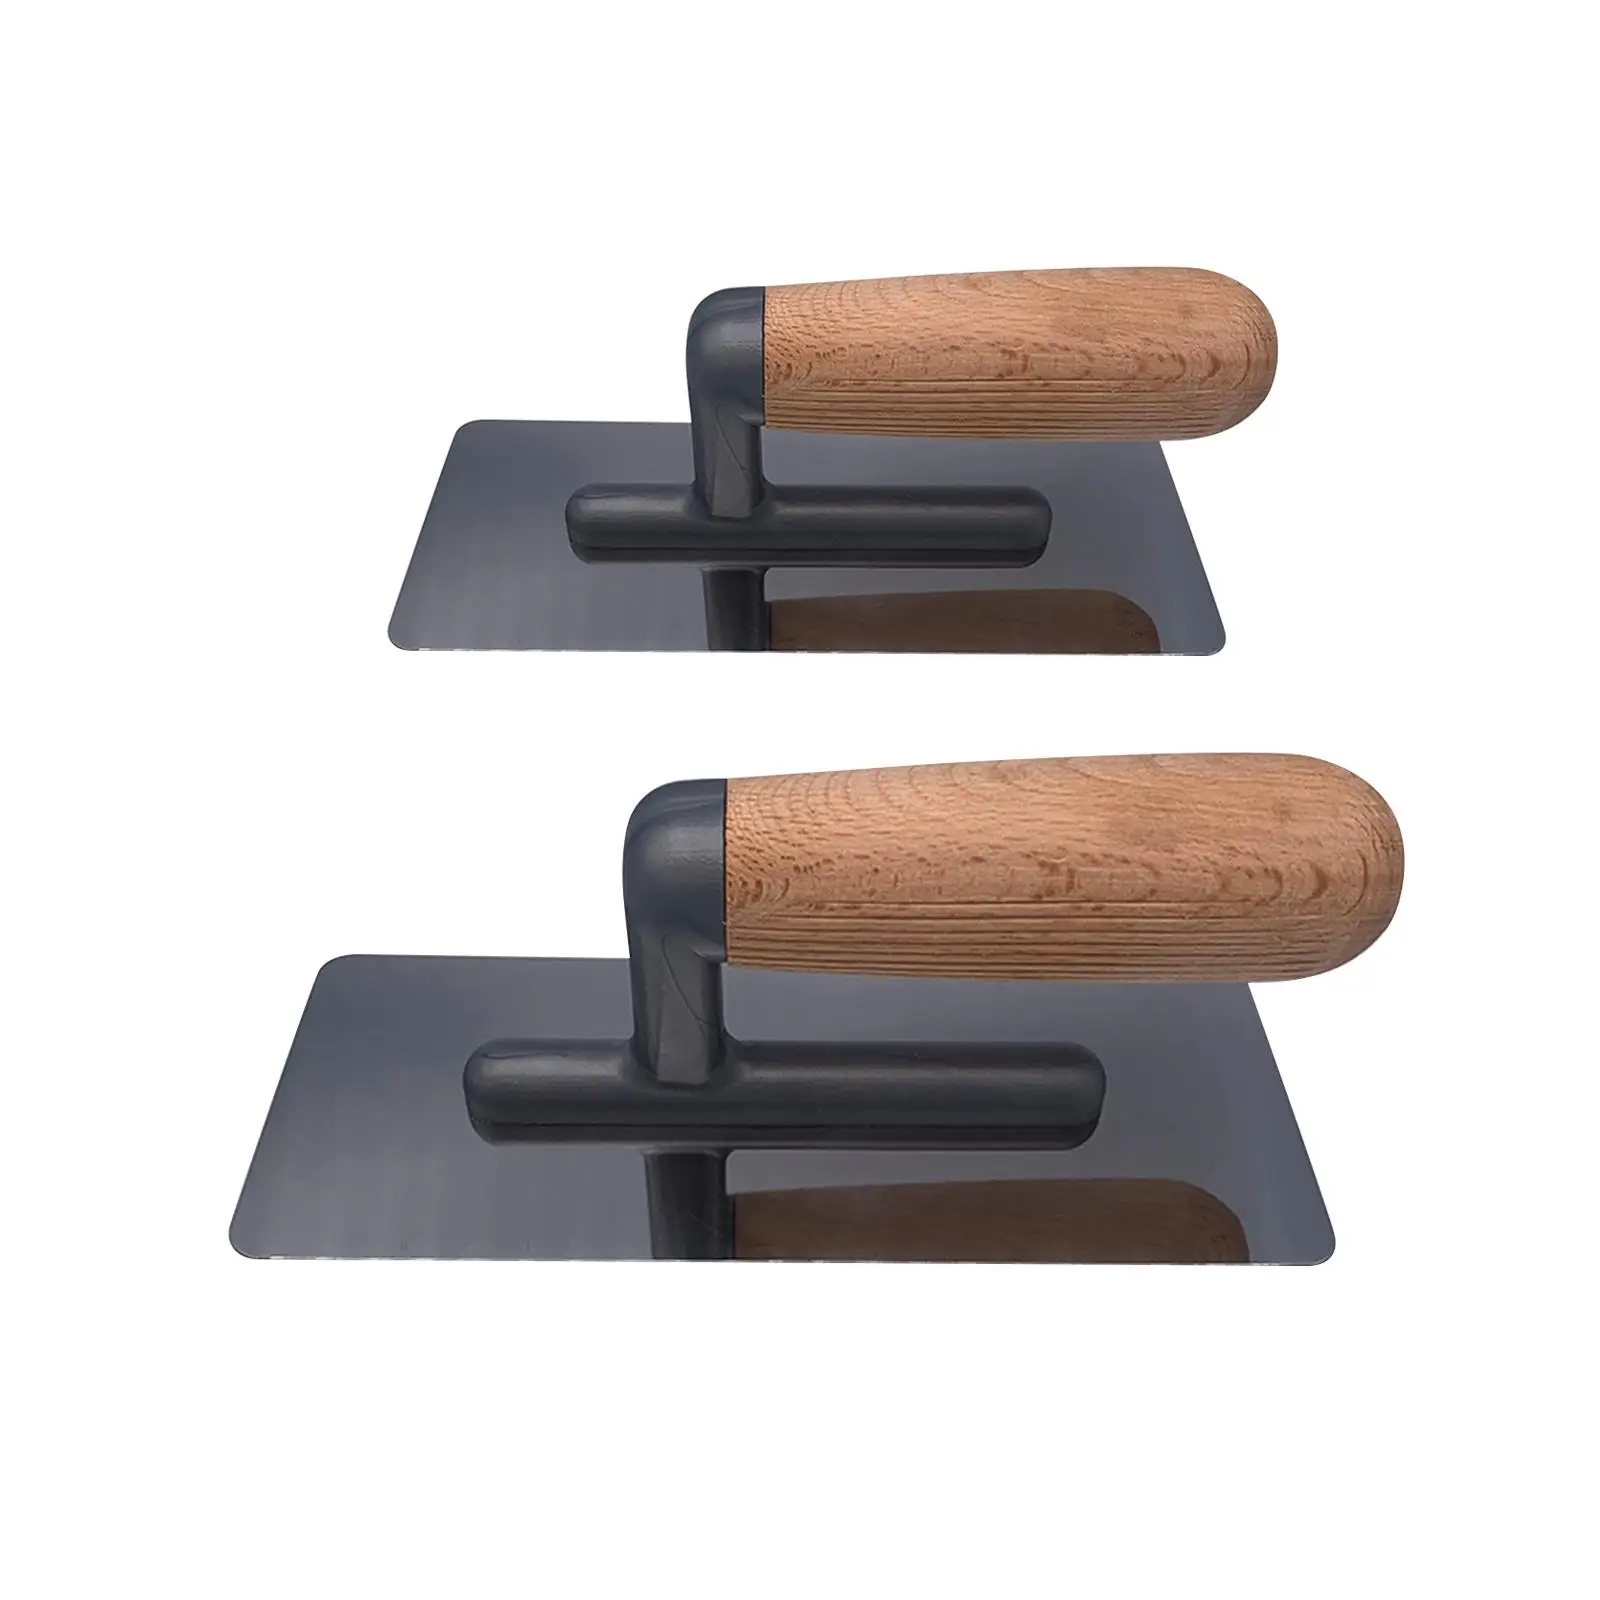 Finishing Trowel Comfort Grip Masonry Trowel Drywall Trowels for Applying Putty Home Decorating Wall Construction Craftsman